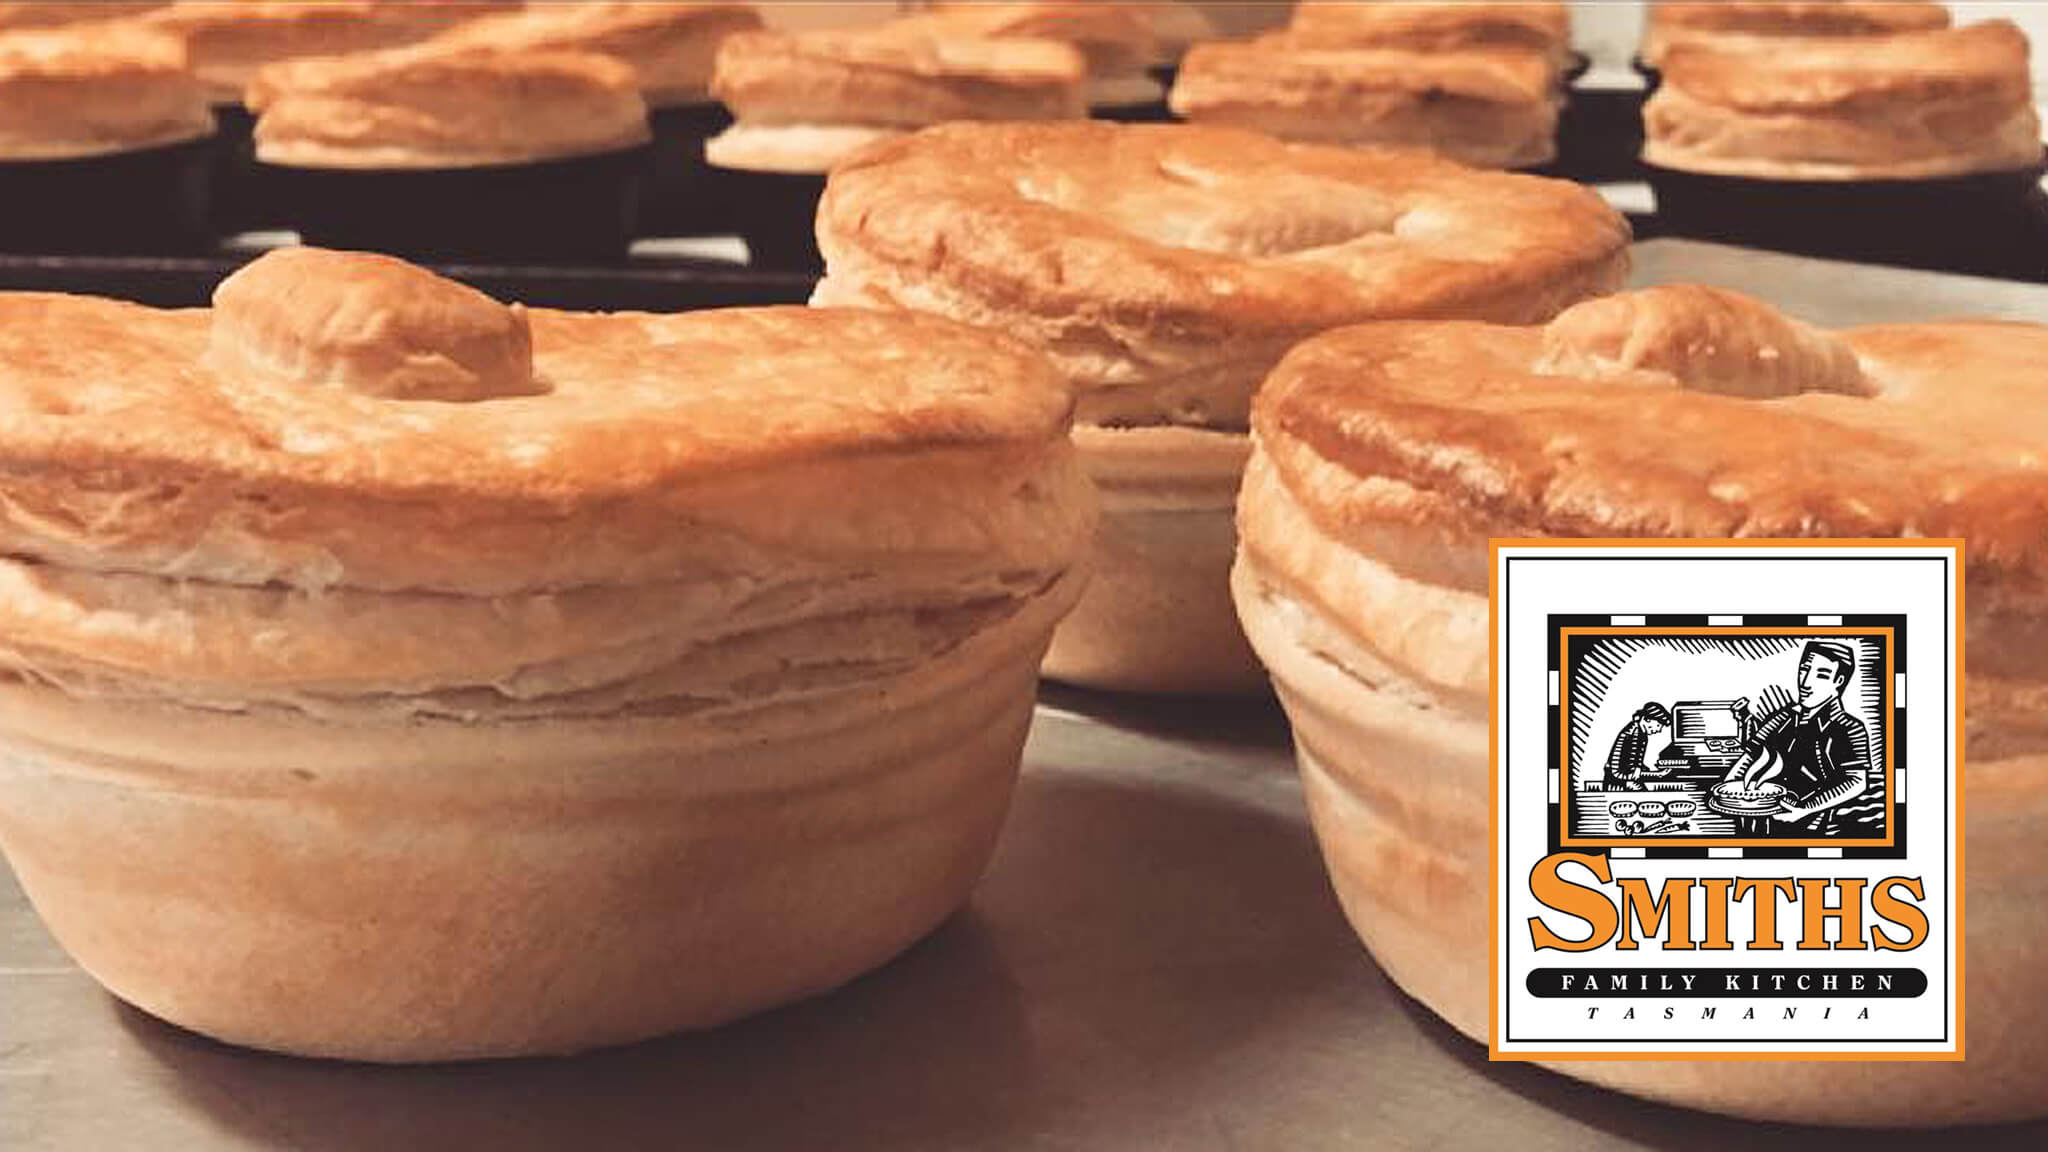 Smiths Specialy Pies puff pastries